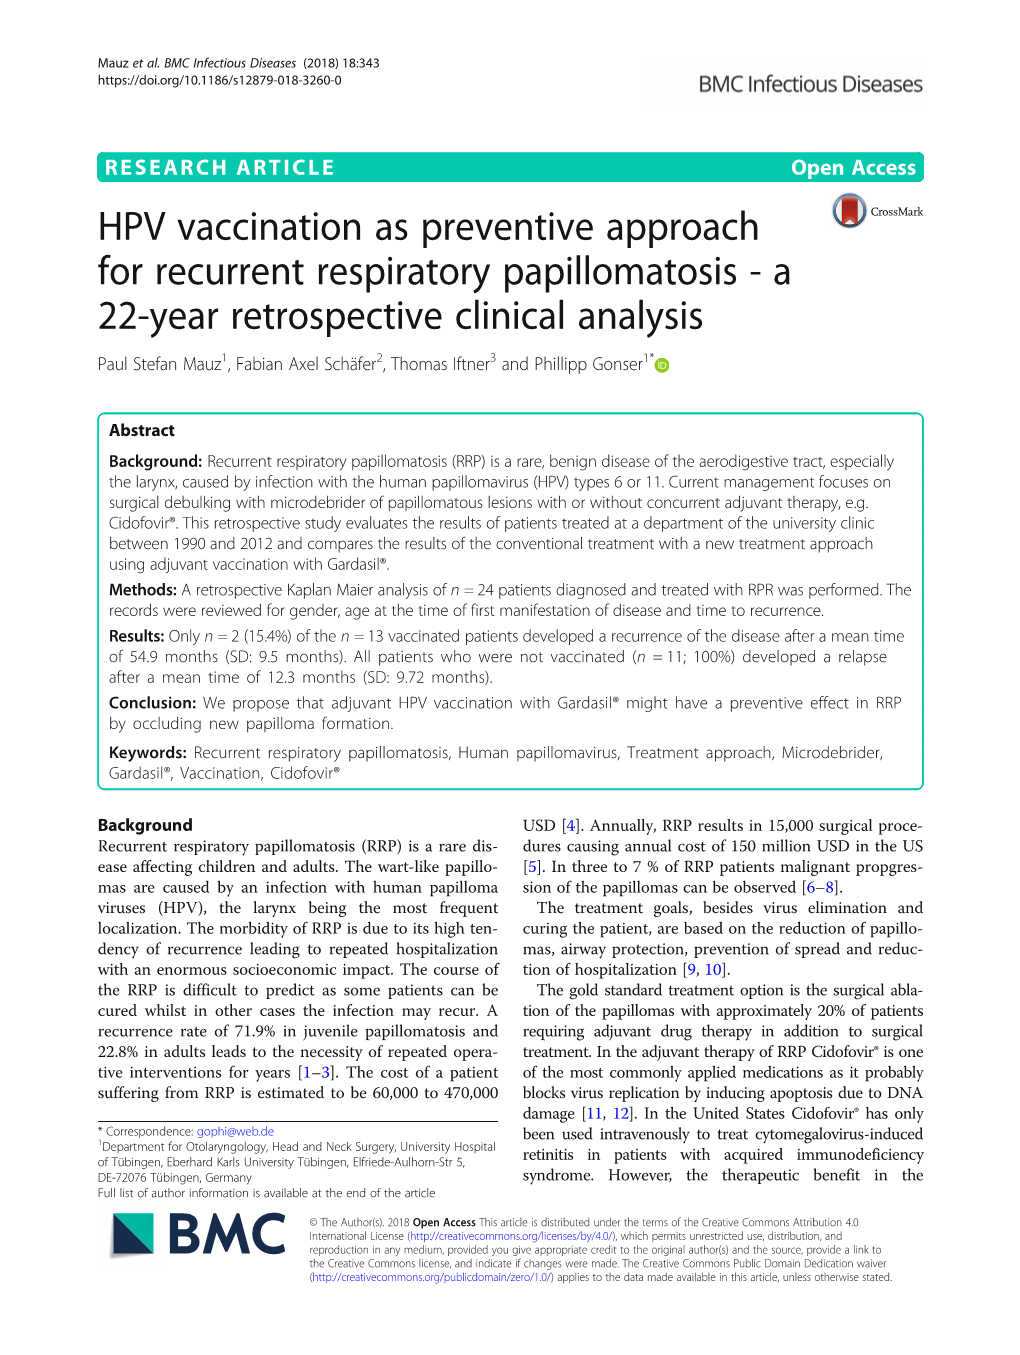 HPV Vaccination As Preventive Approach for Recurrent Respiratory